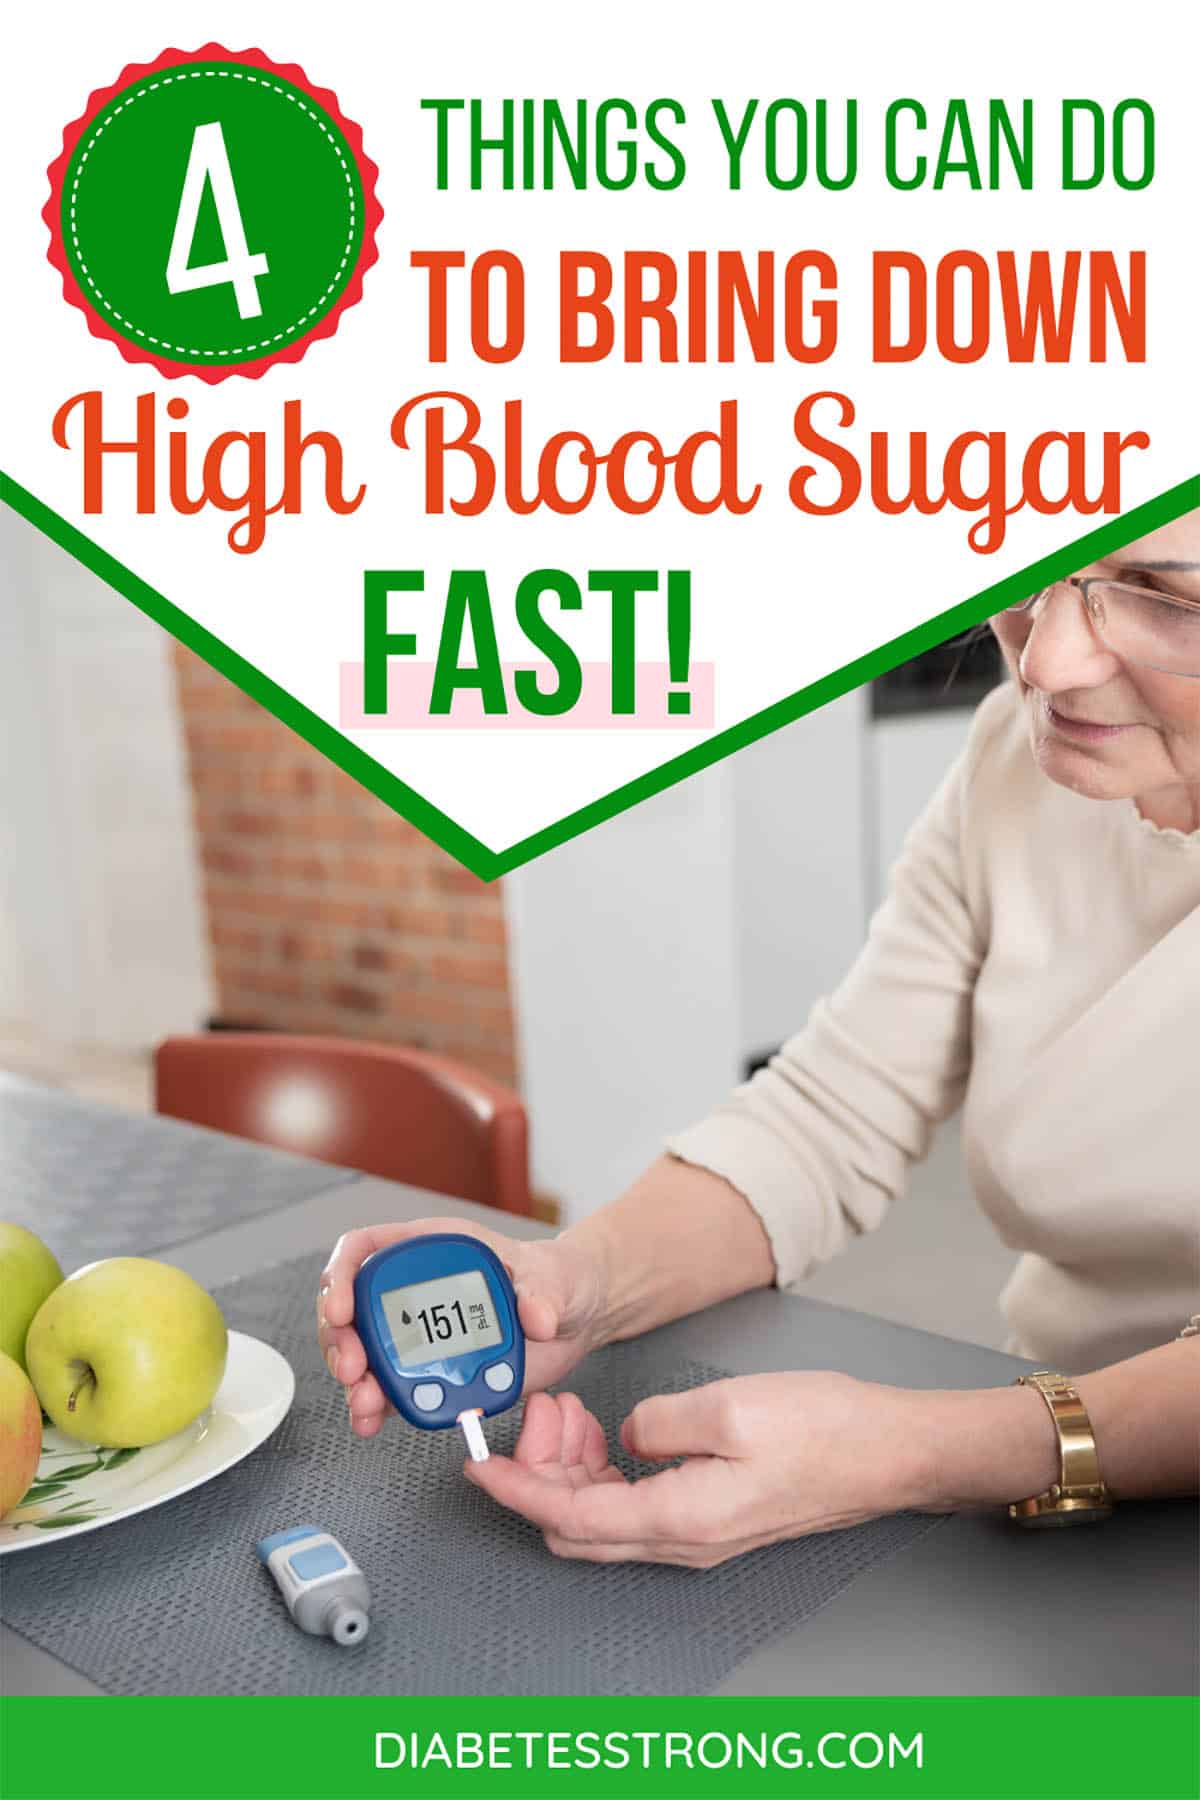 How to Bring High Blood Sugar Down Fast